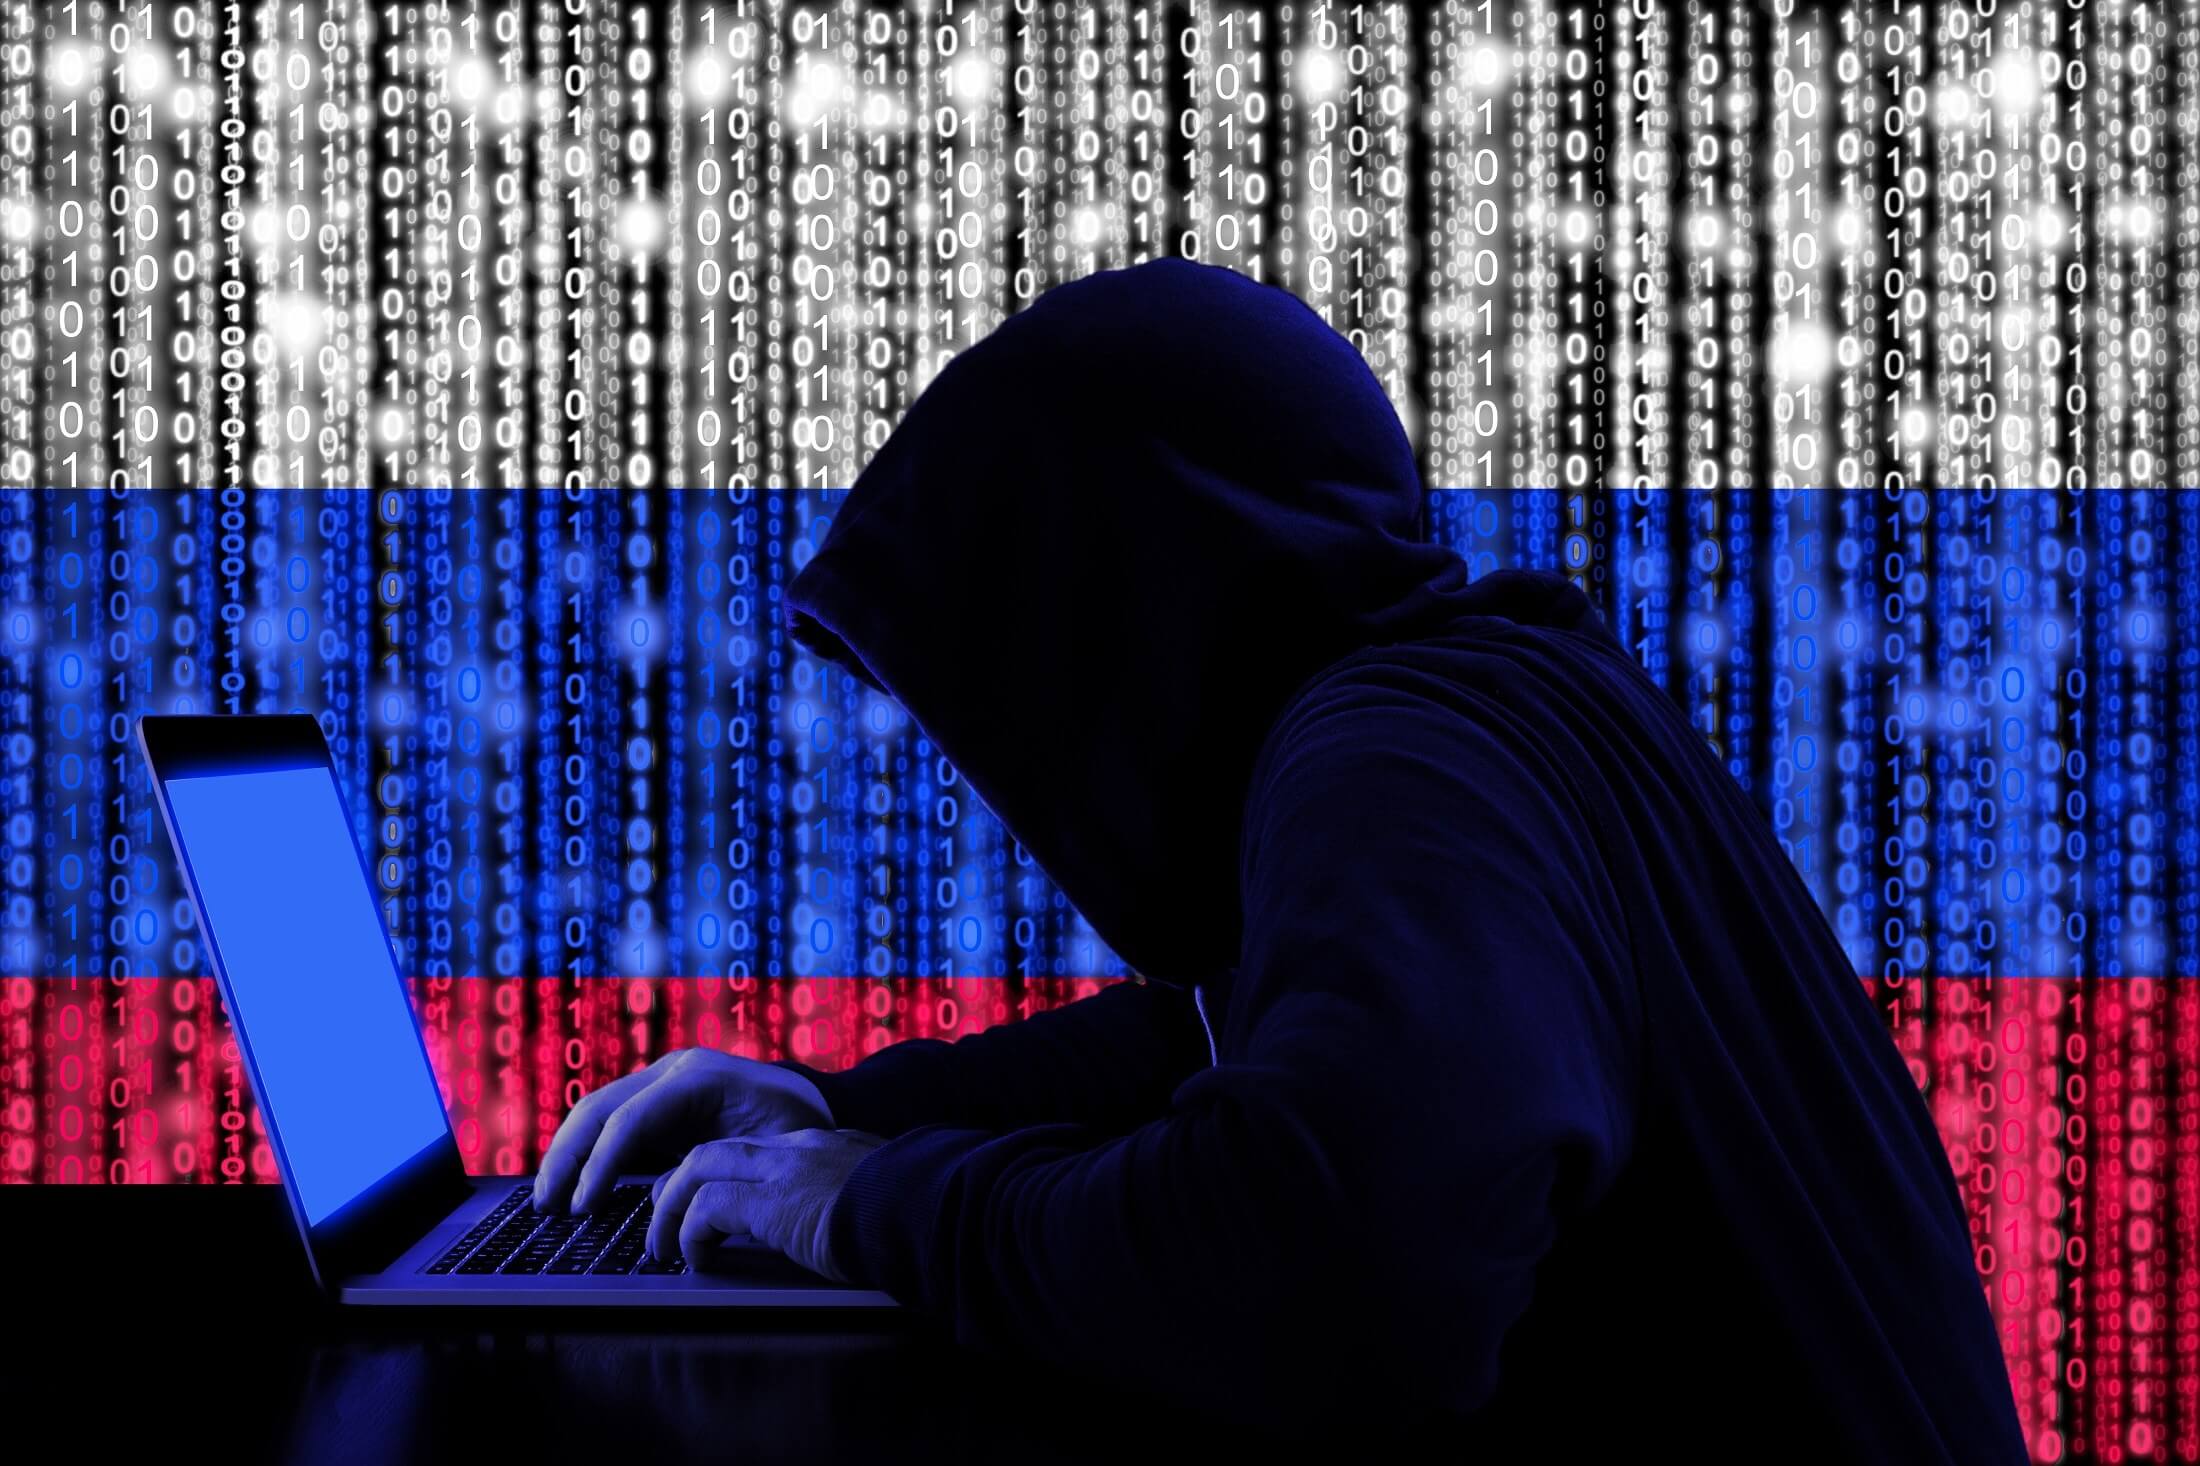 Russian state-sponsored hackers are faster than those from other nations